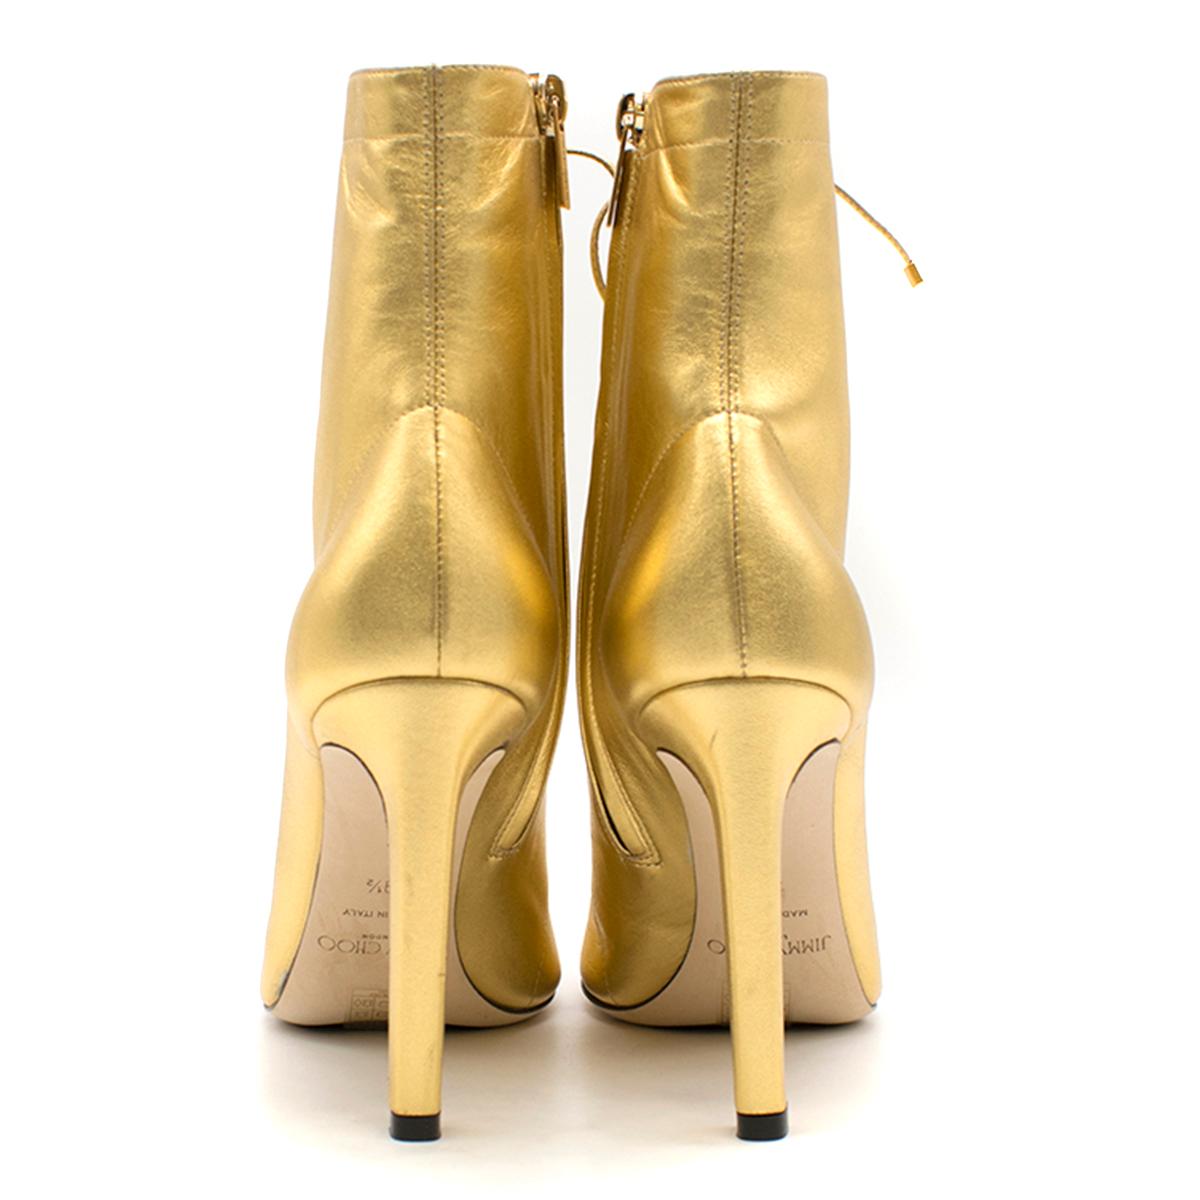 Jimmy Choo Gold Daize Metallic Leather Ankle Boots US 9.5 im Zustand „Hervorragend“ in London, GB